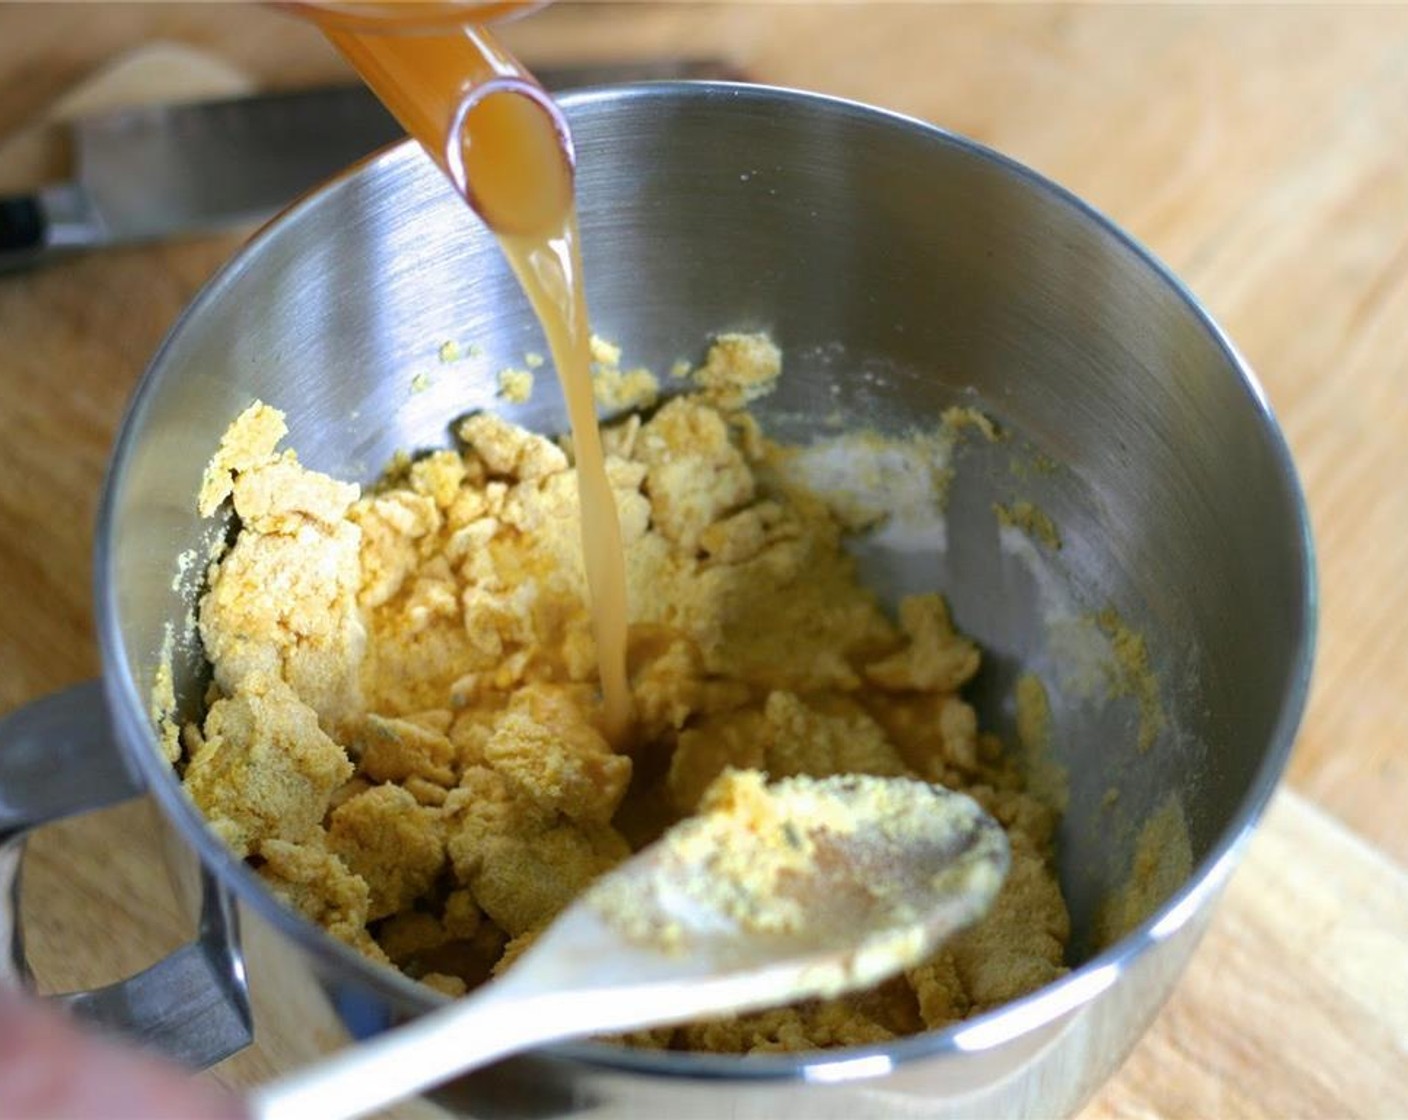 step 2 In a large bowl, mix together the Corn Masa Flour (3 cups), Baking Powder (1/2 Tbsp), Mexican Oregano (1 Tbsp) and Sea Salt (1 tsp).